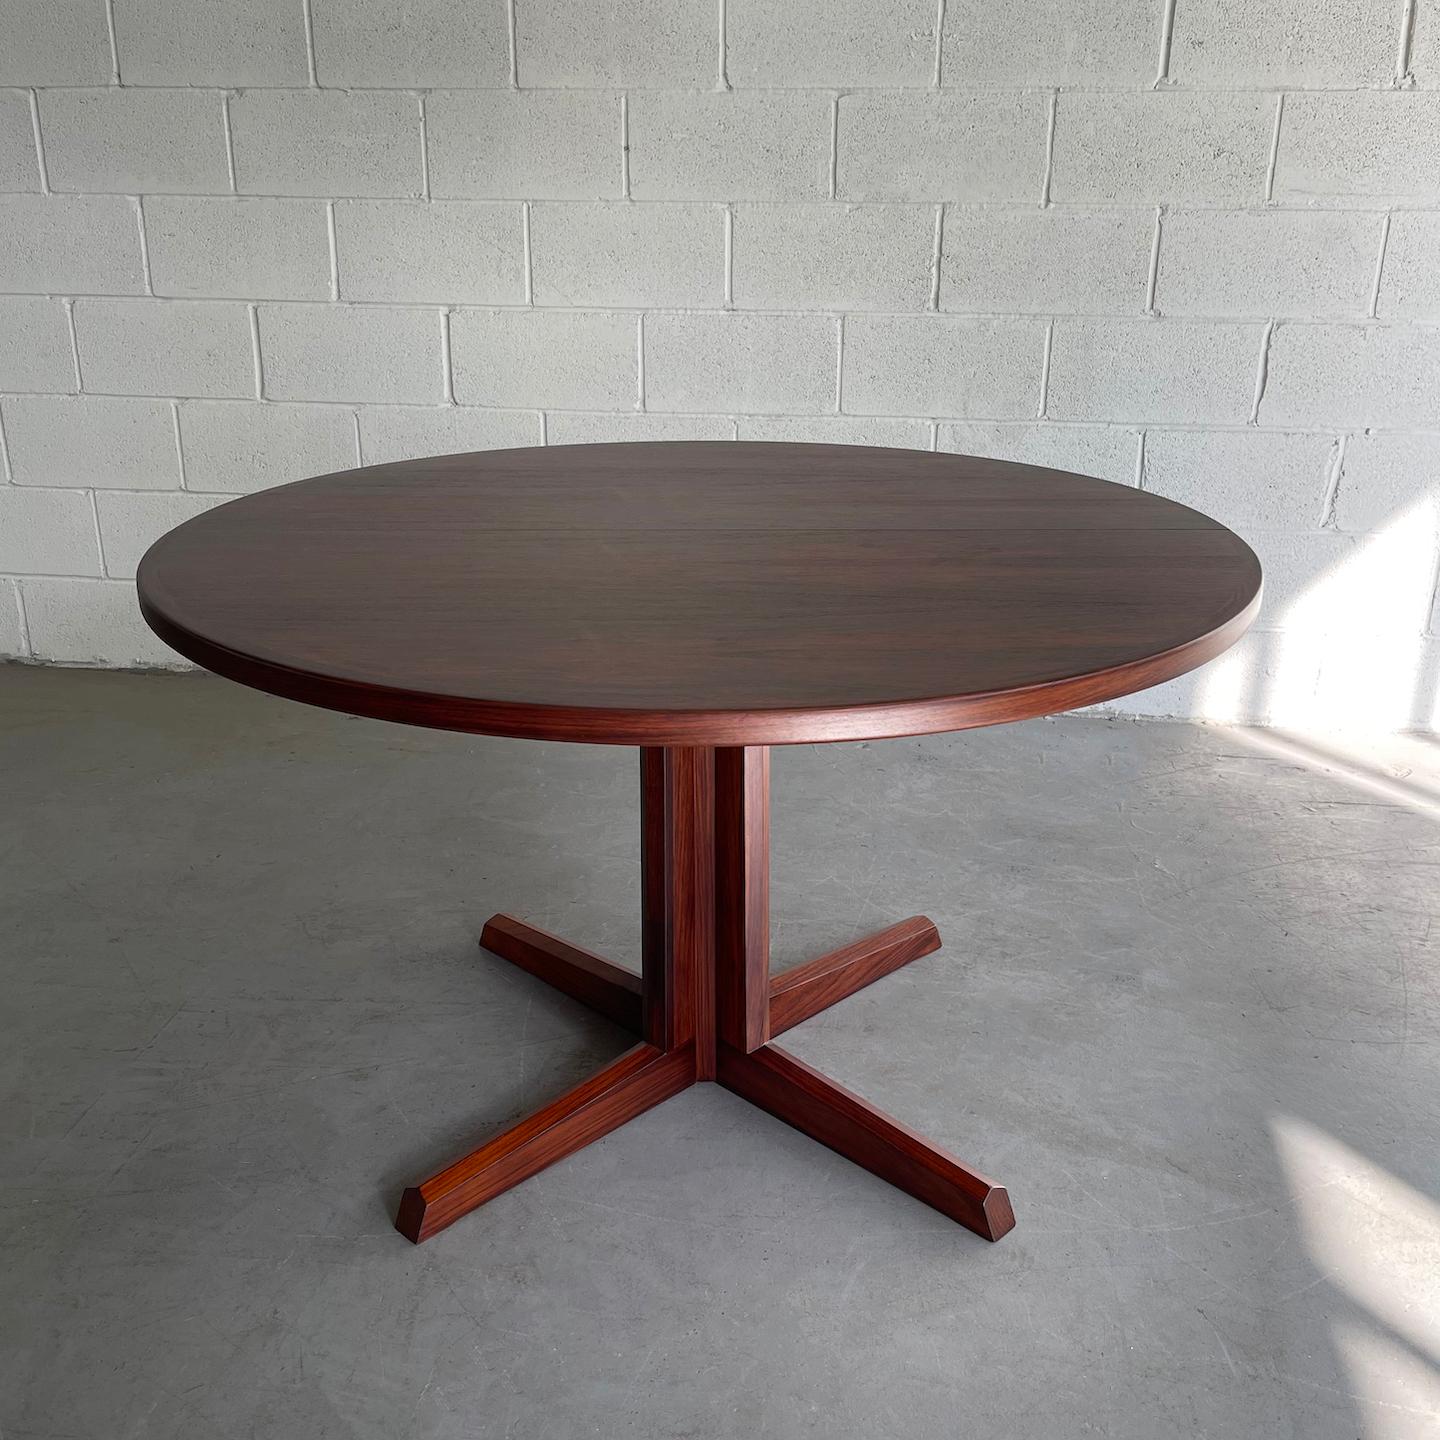 Nicely proportioned, Danish modern, round, rosewood, dining table features a pedestal base.